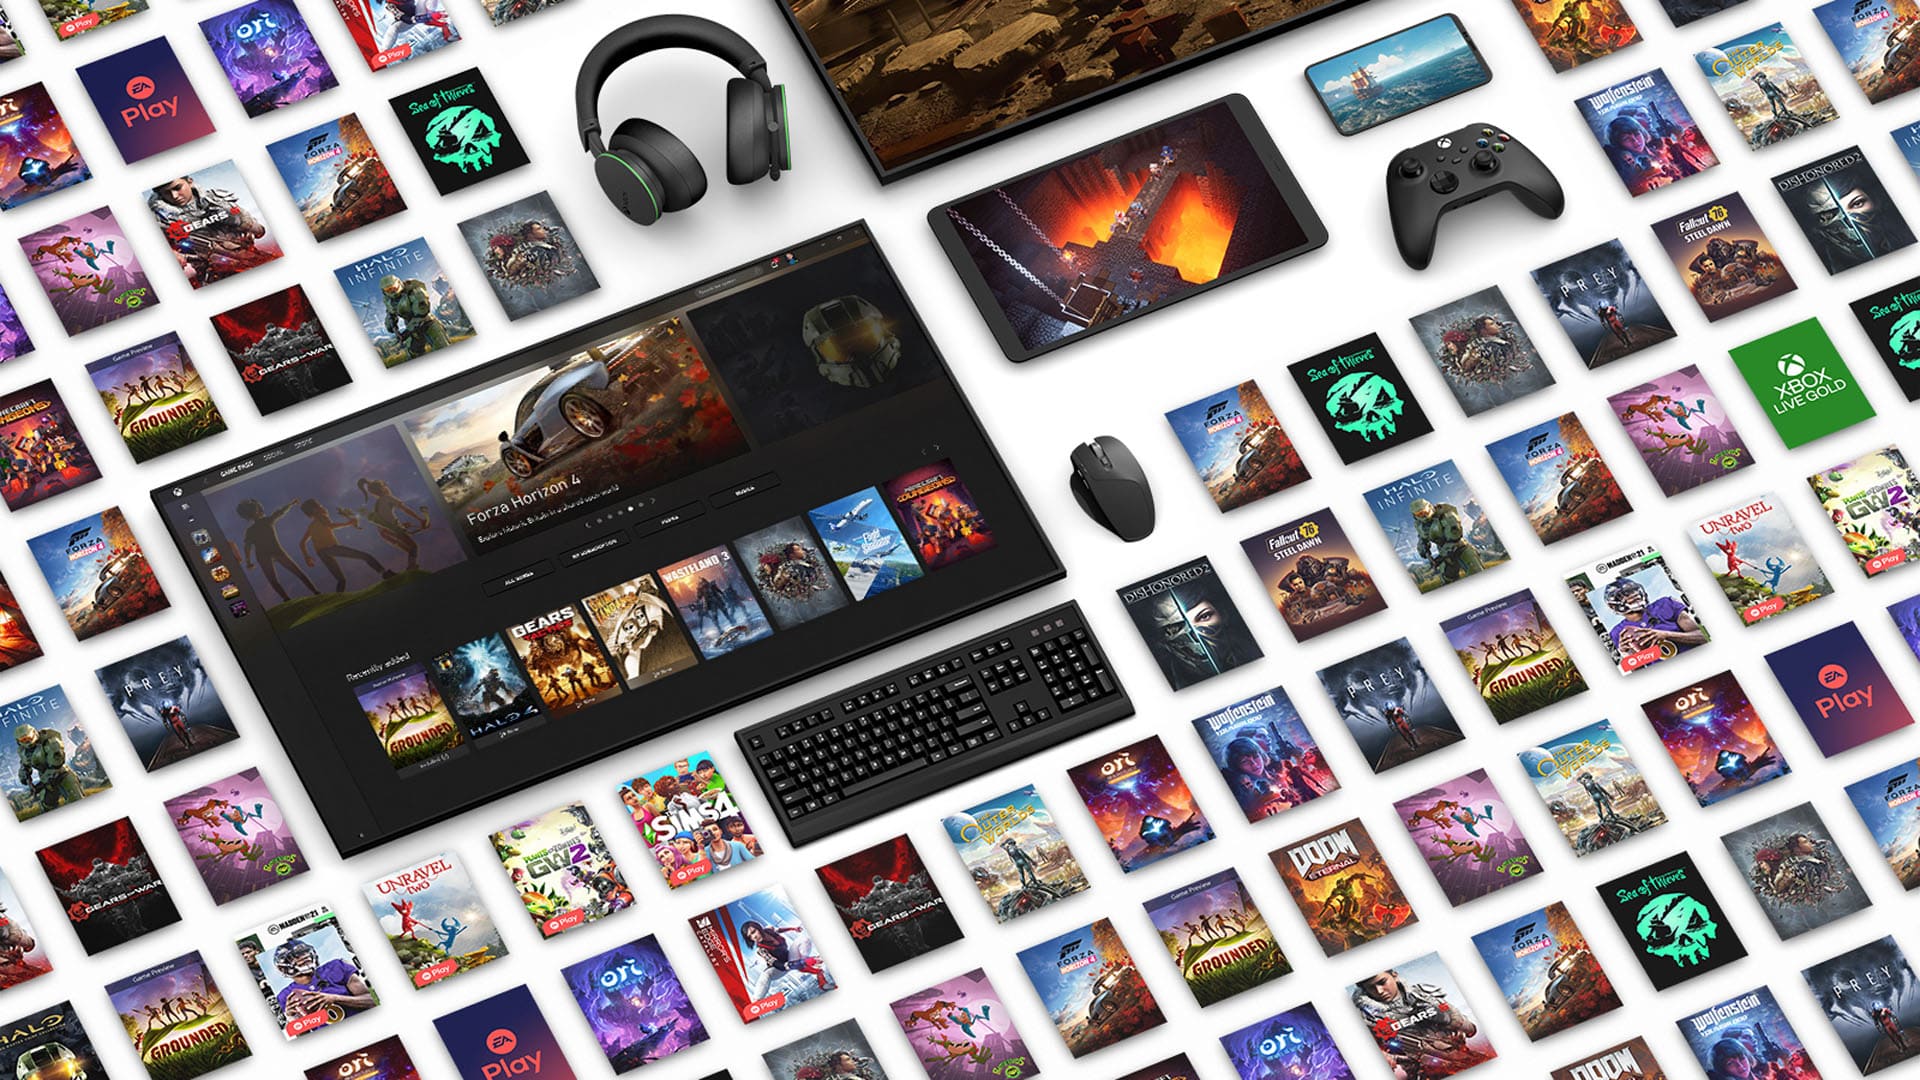 Promotional image of Xbox Game Pass Ultimate showcasing a variety of available games